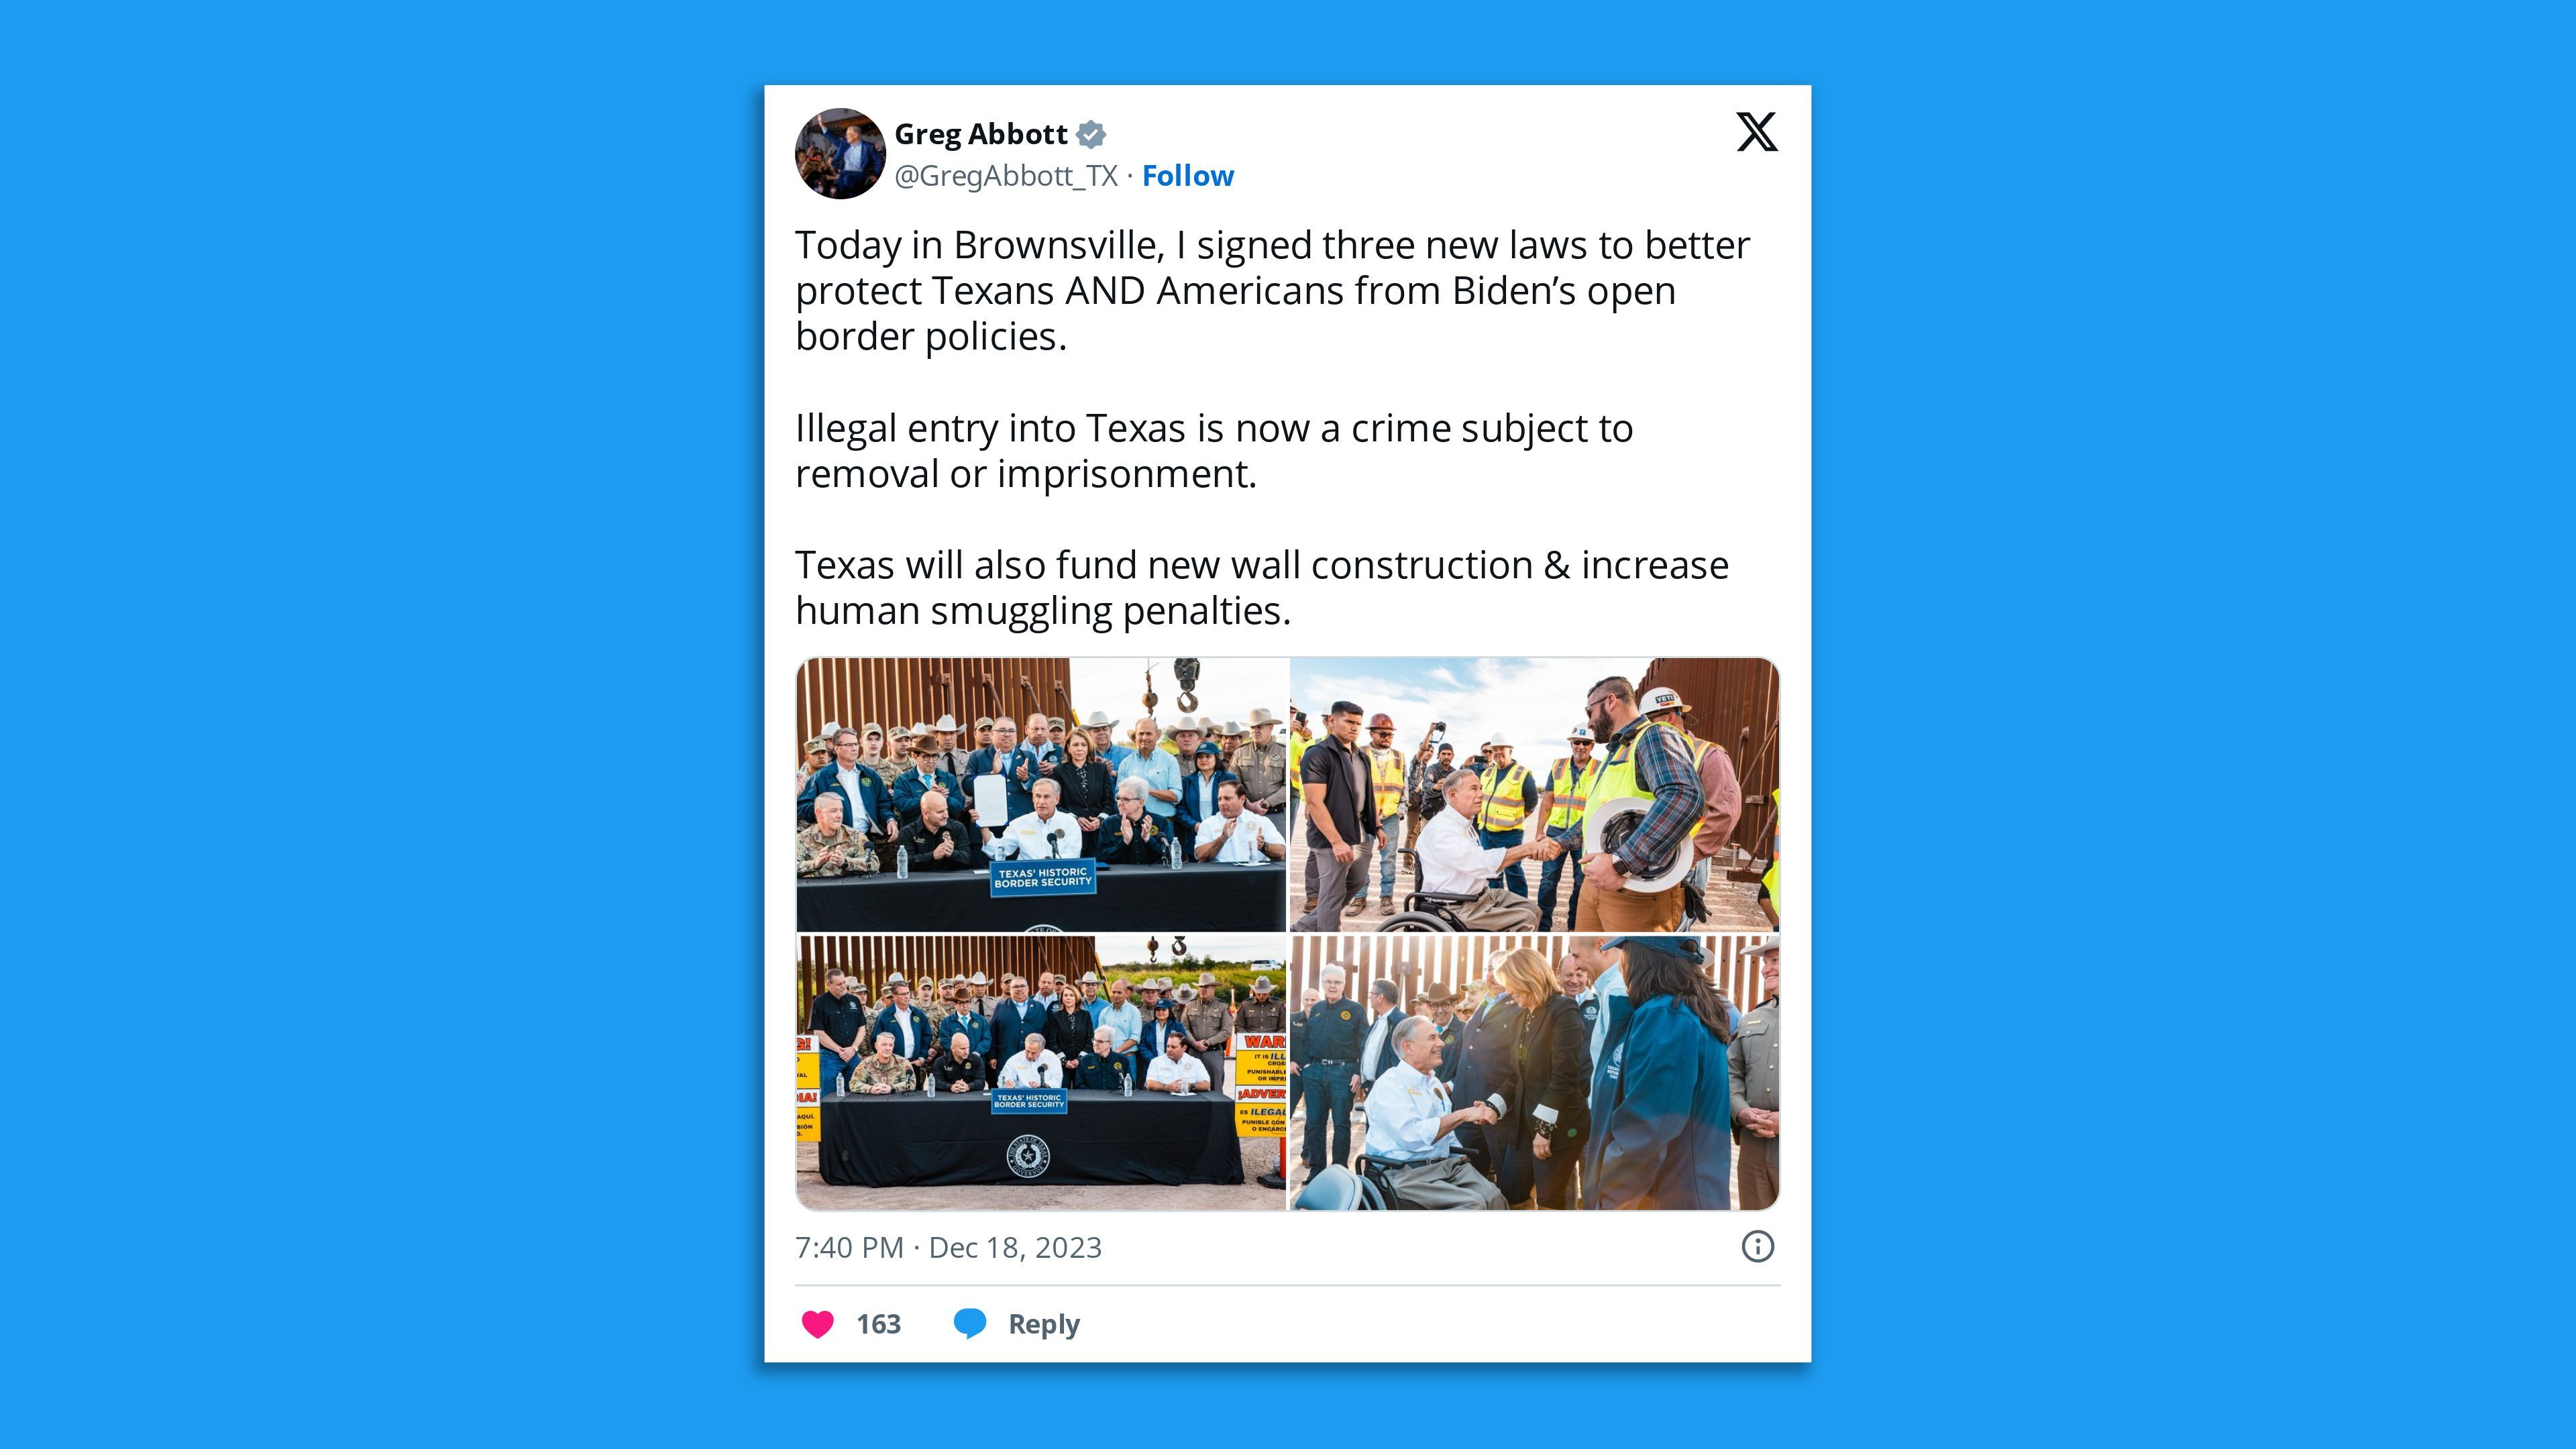 A screenshot of a Twitter photo post of Texas Gov. Greg Abbott at the border, with the comment: "Today in Brownsville, I signed three new laws to better protect Texans AND Americans from Biden’s open border policies.   Illegal entry into Texas is now a crime subject to removal or imprisonment.  Texas will also fund new wall construction & increase human smuggling penalties."